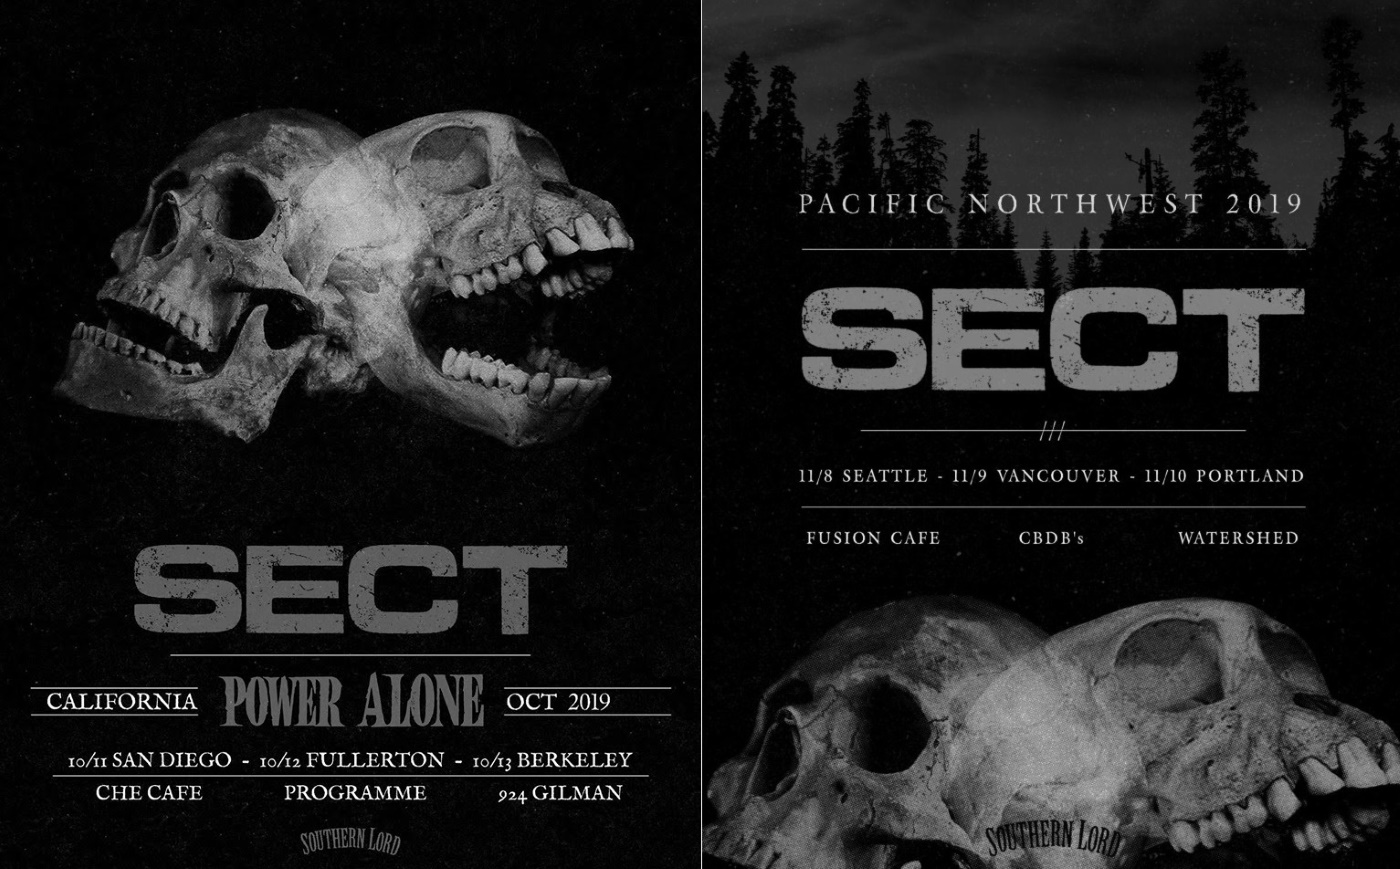 SECT dates